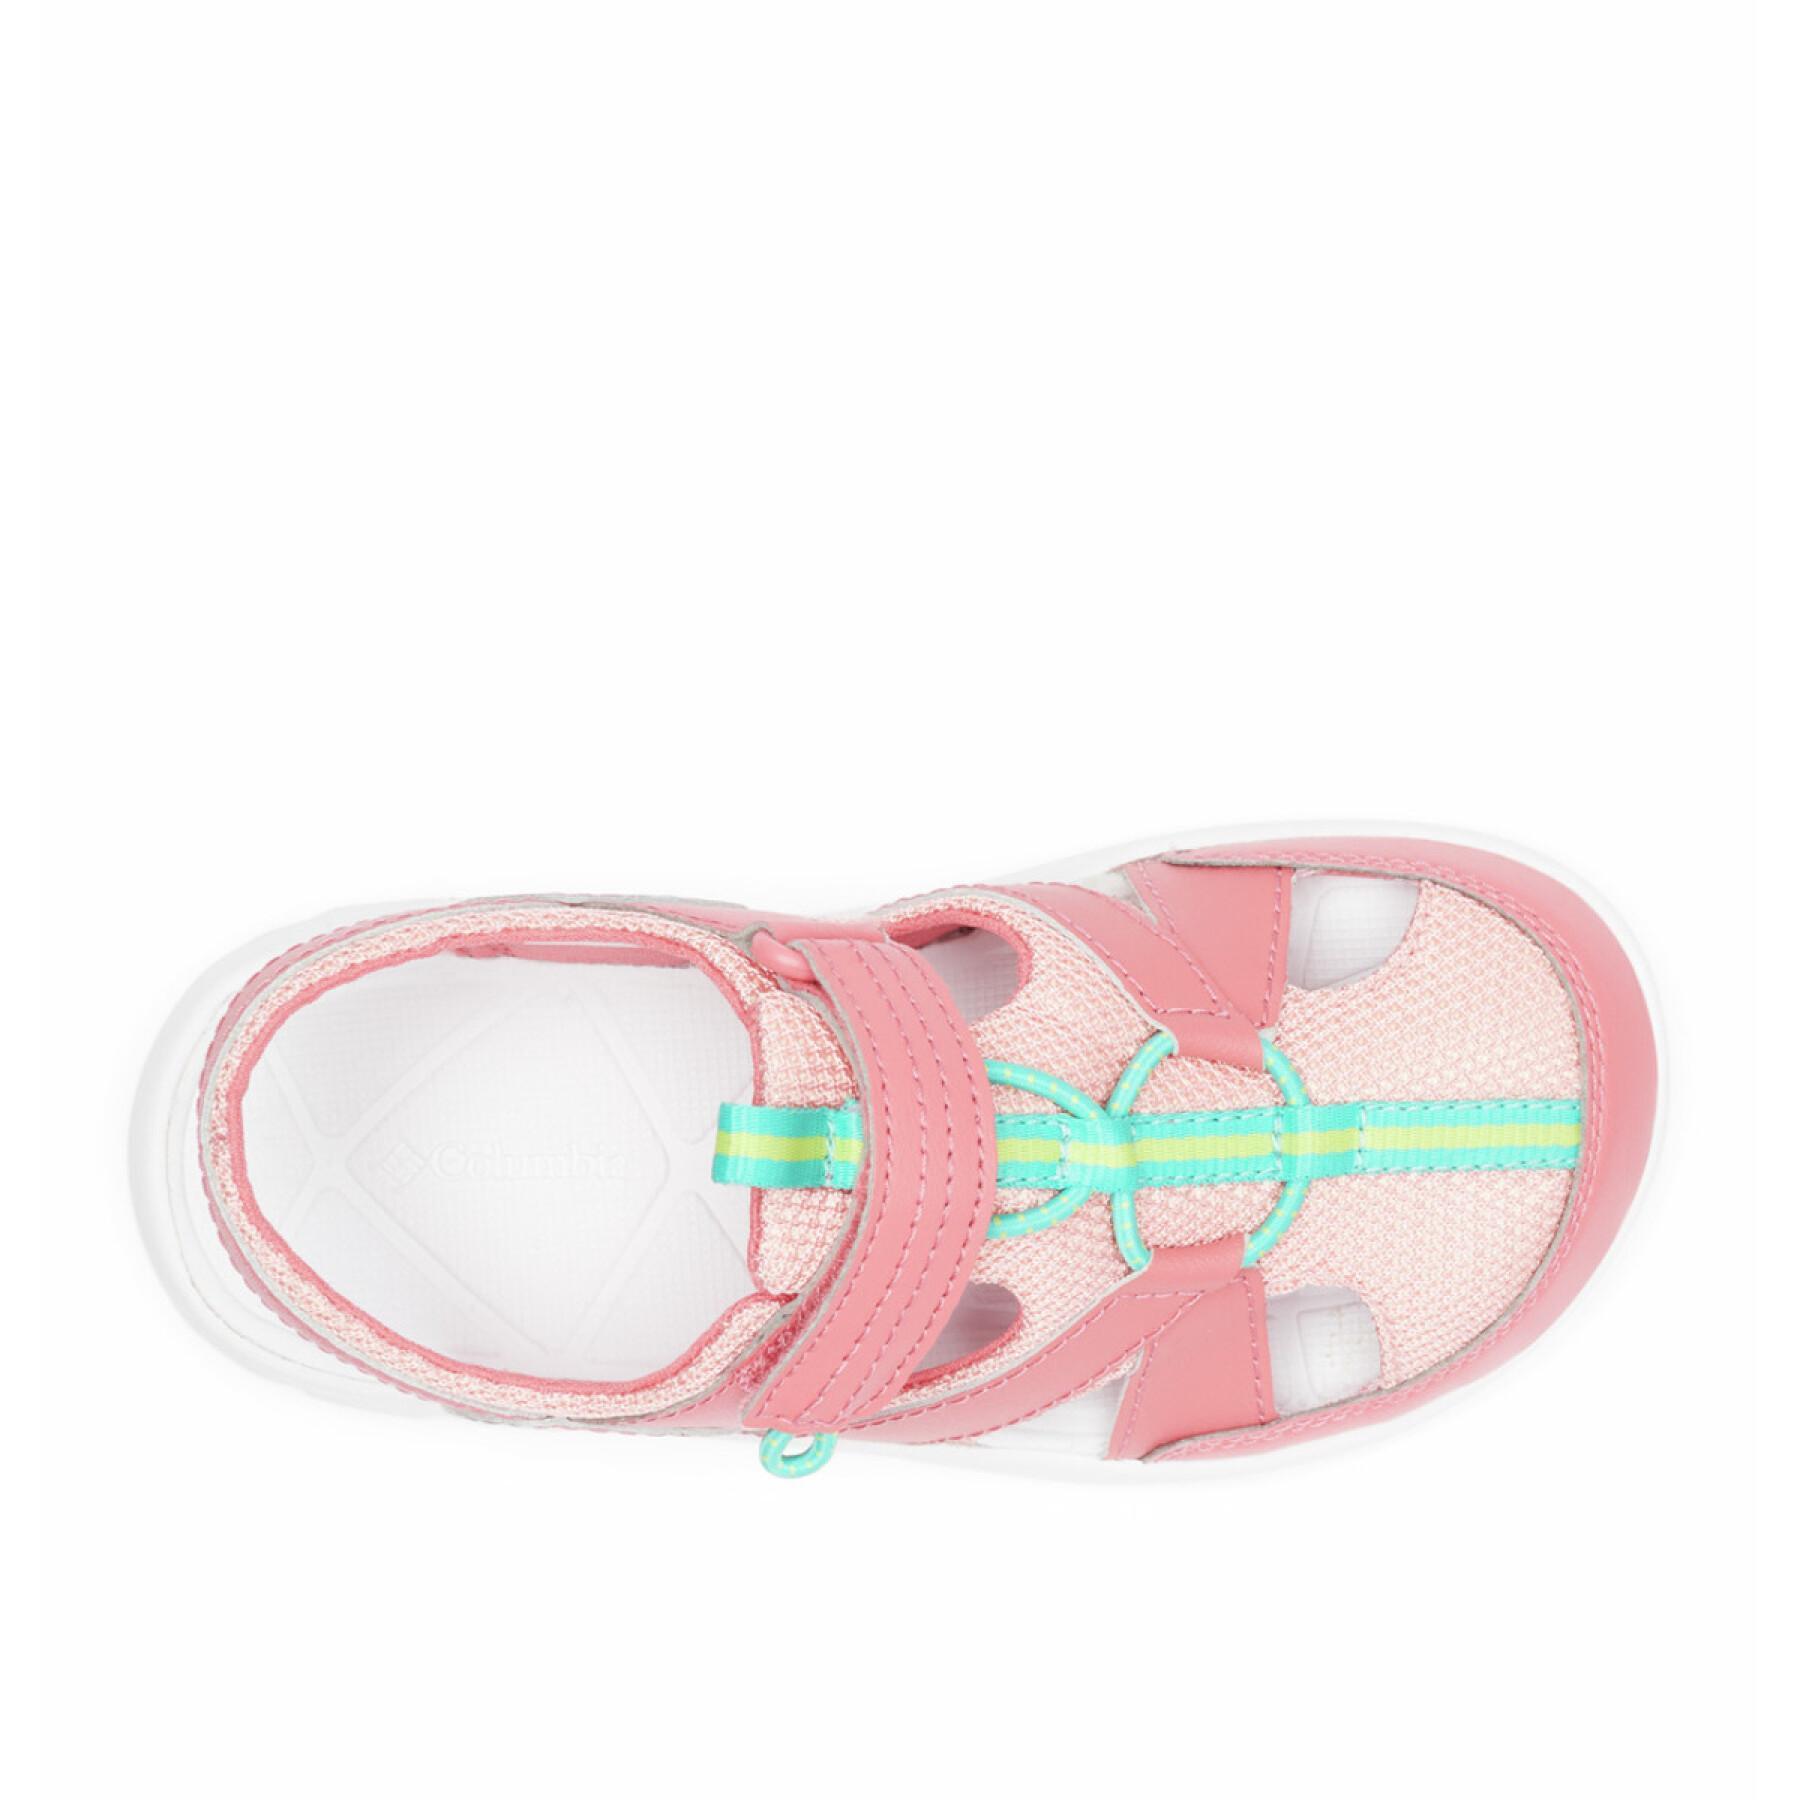 Children's sandals Columbia YOUTH TECHSUN WAVE